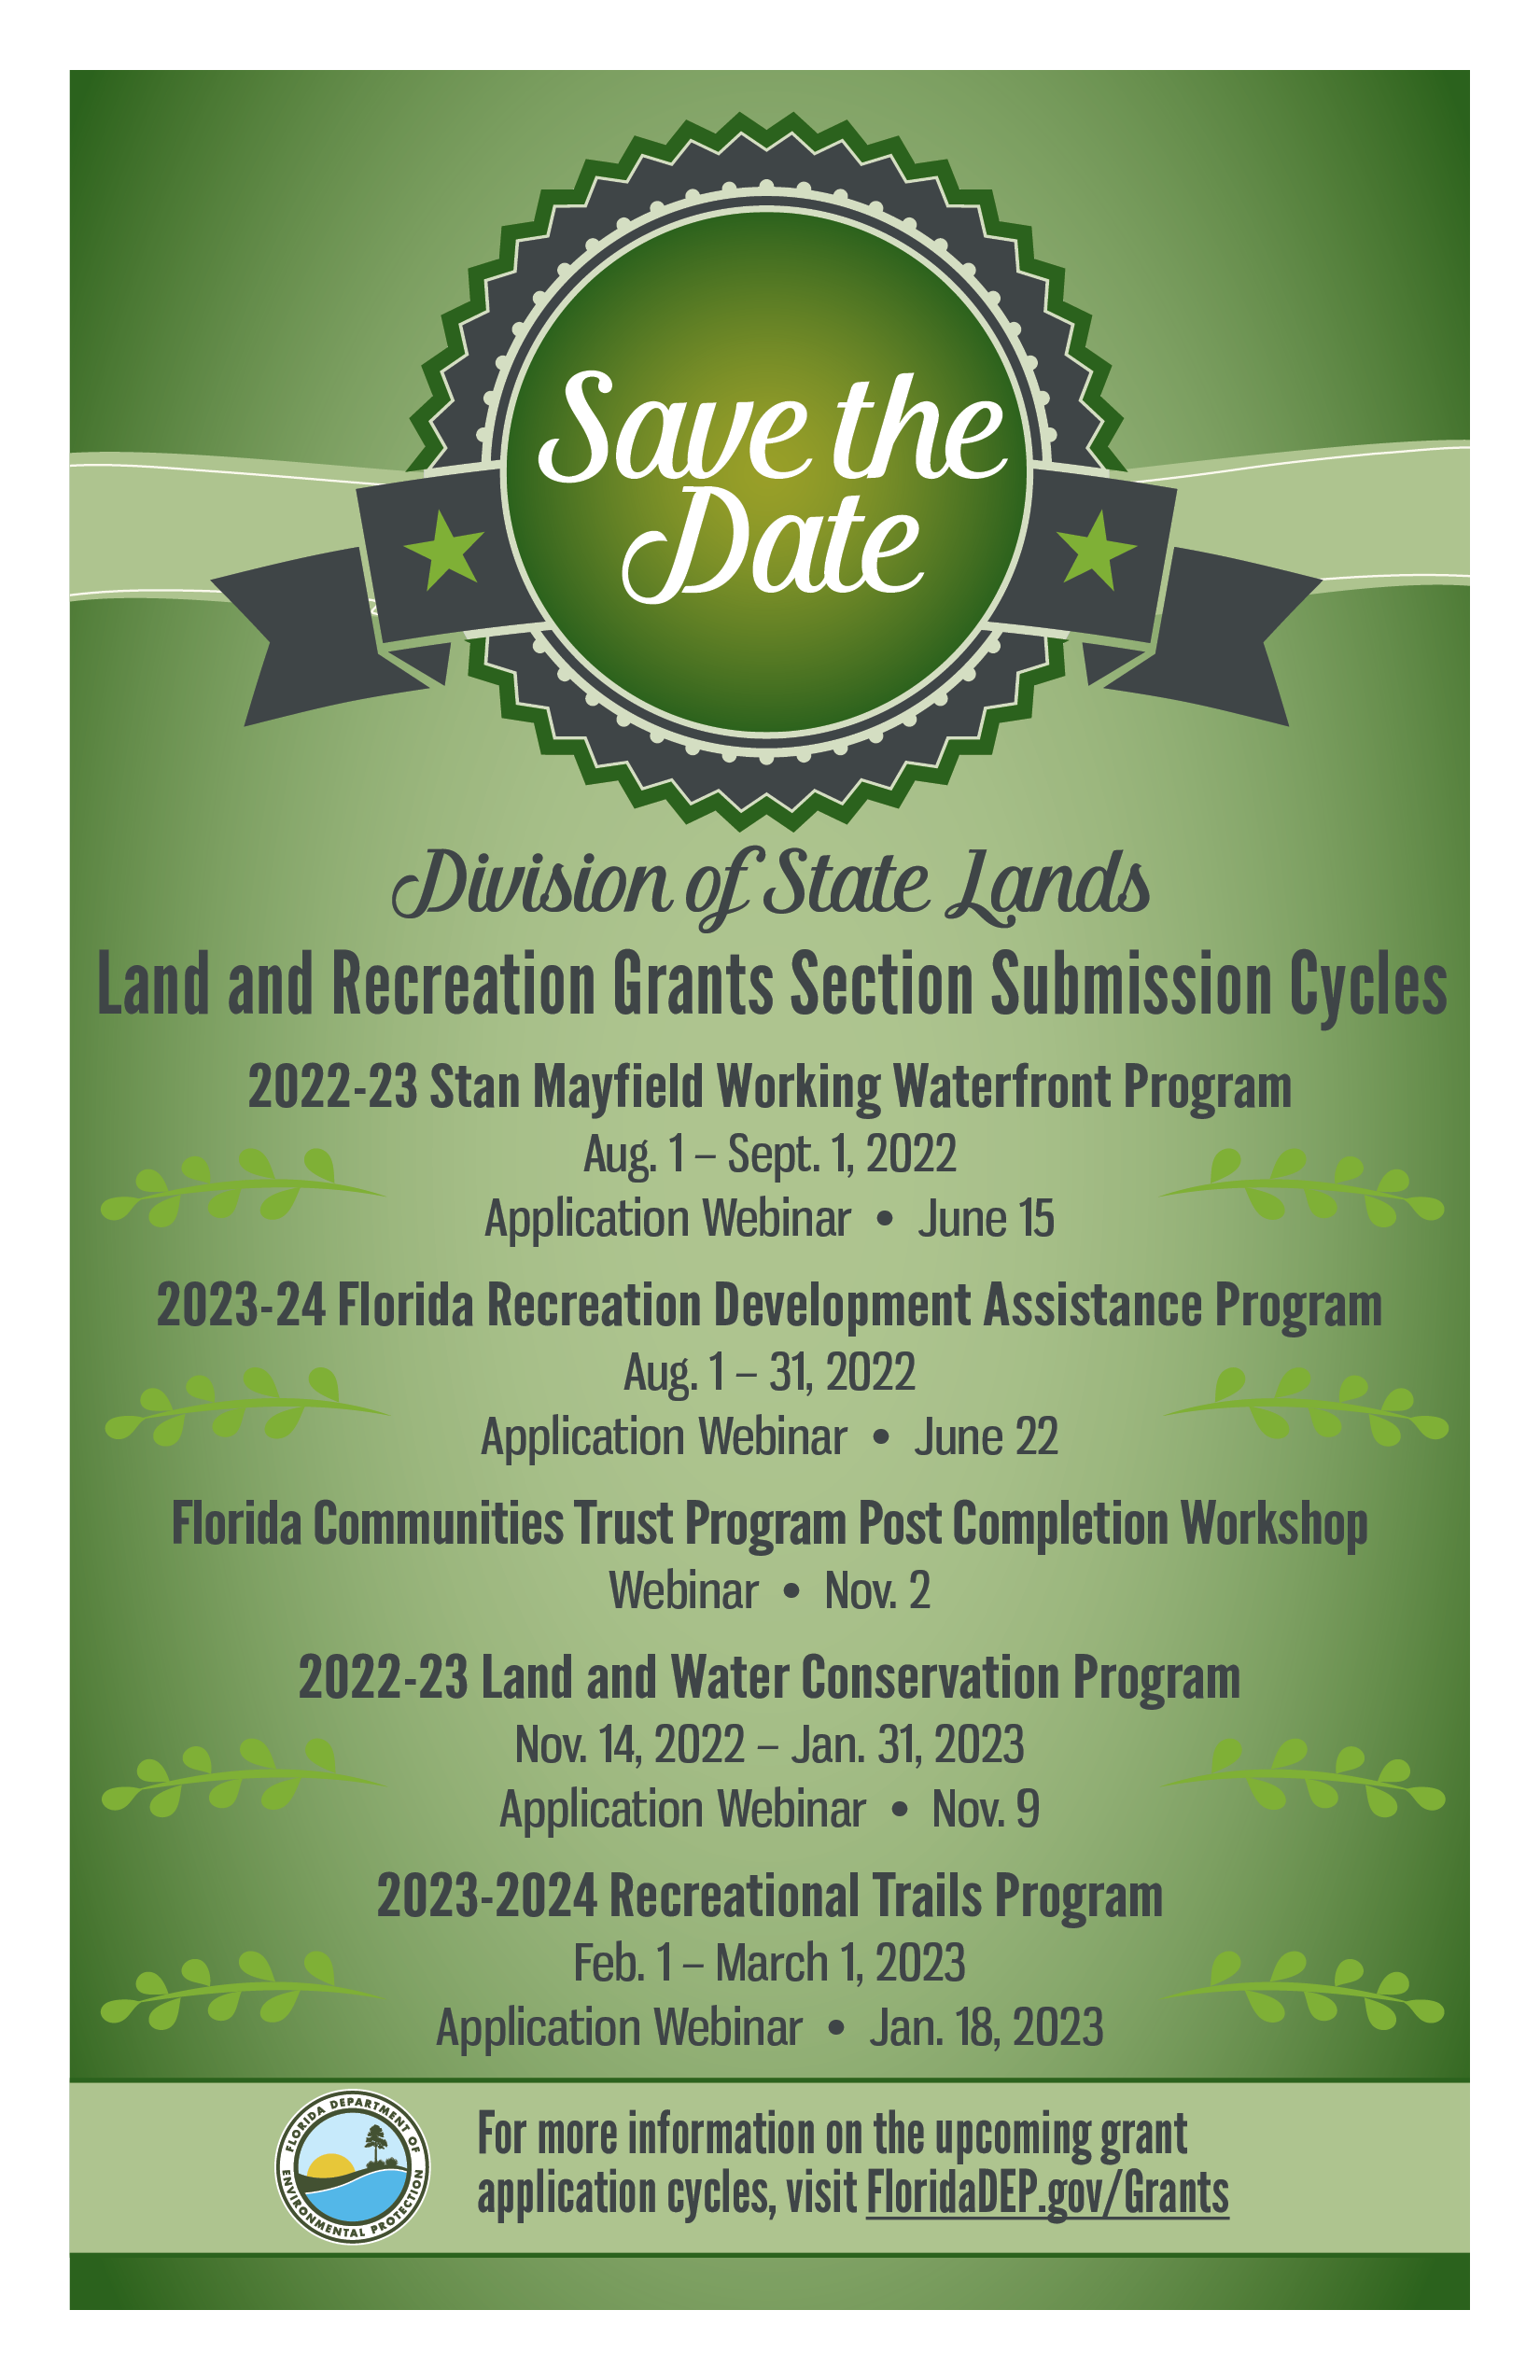 Land and Recreation Grant Cycle flyer, August 2022 update